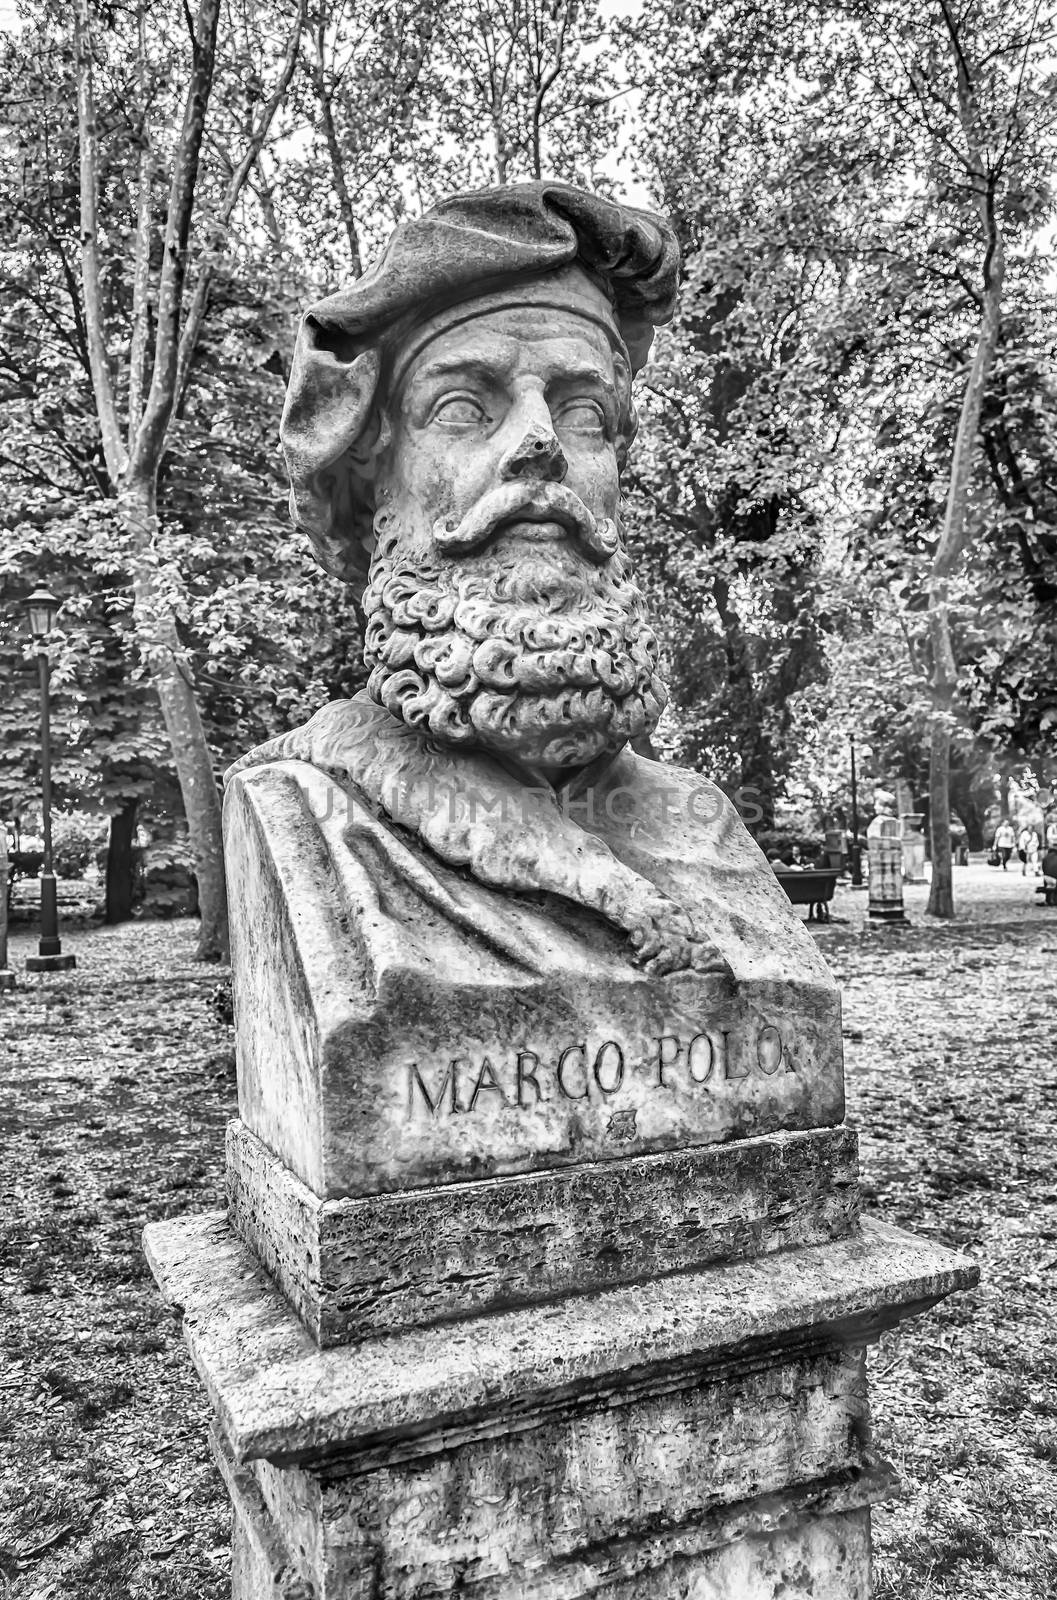 Bust statue of Marco Polo. Sculpture in Villa Borghese park, Rom by marcorubino